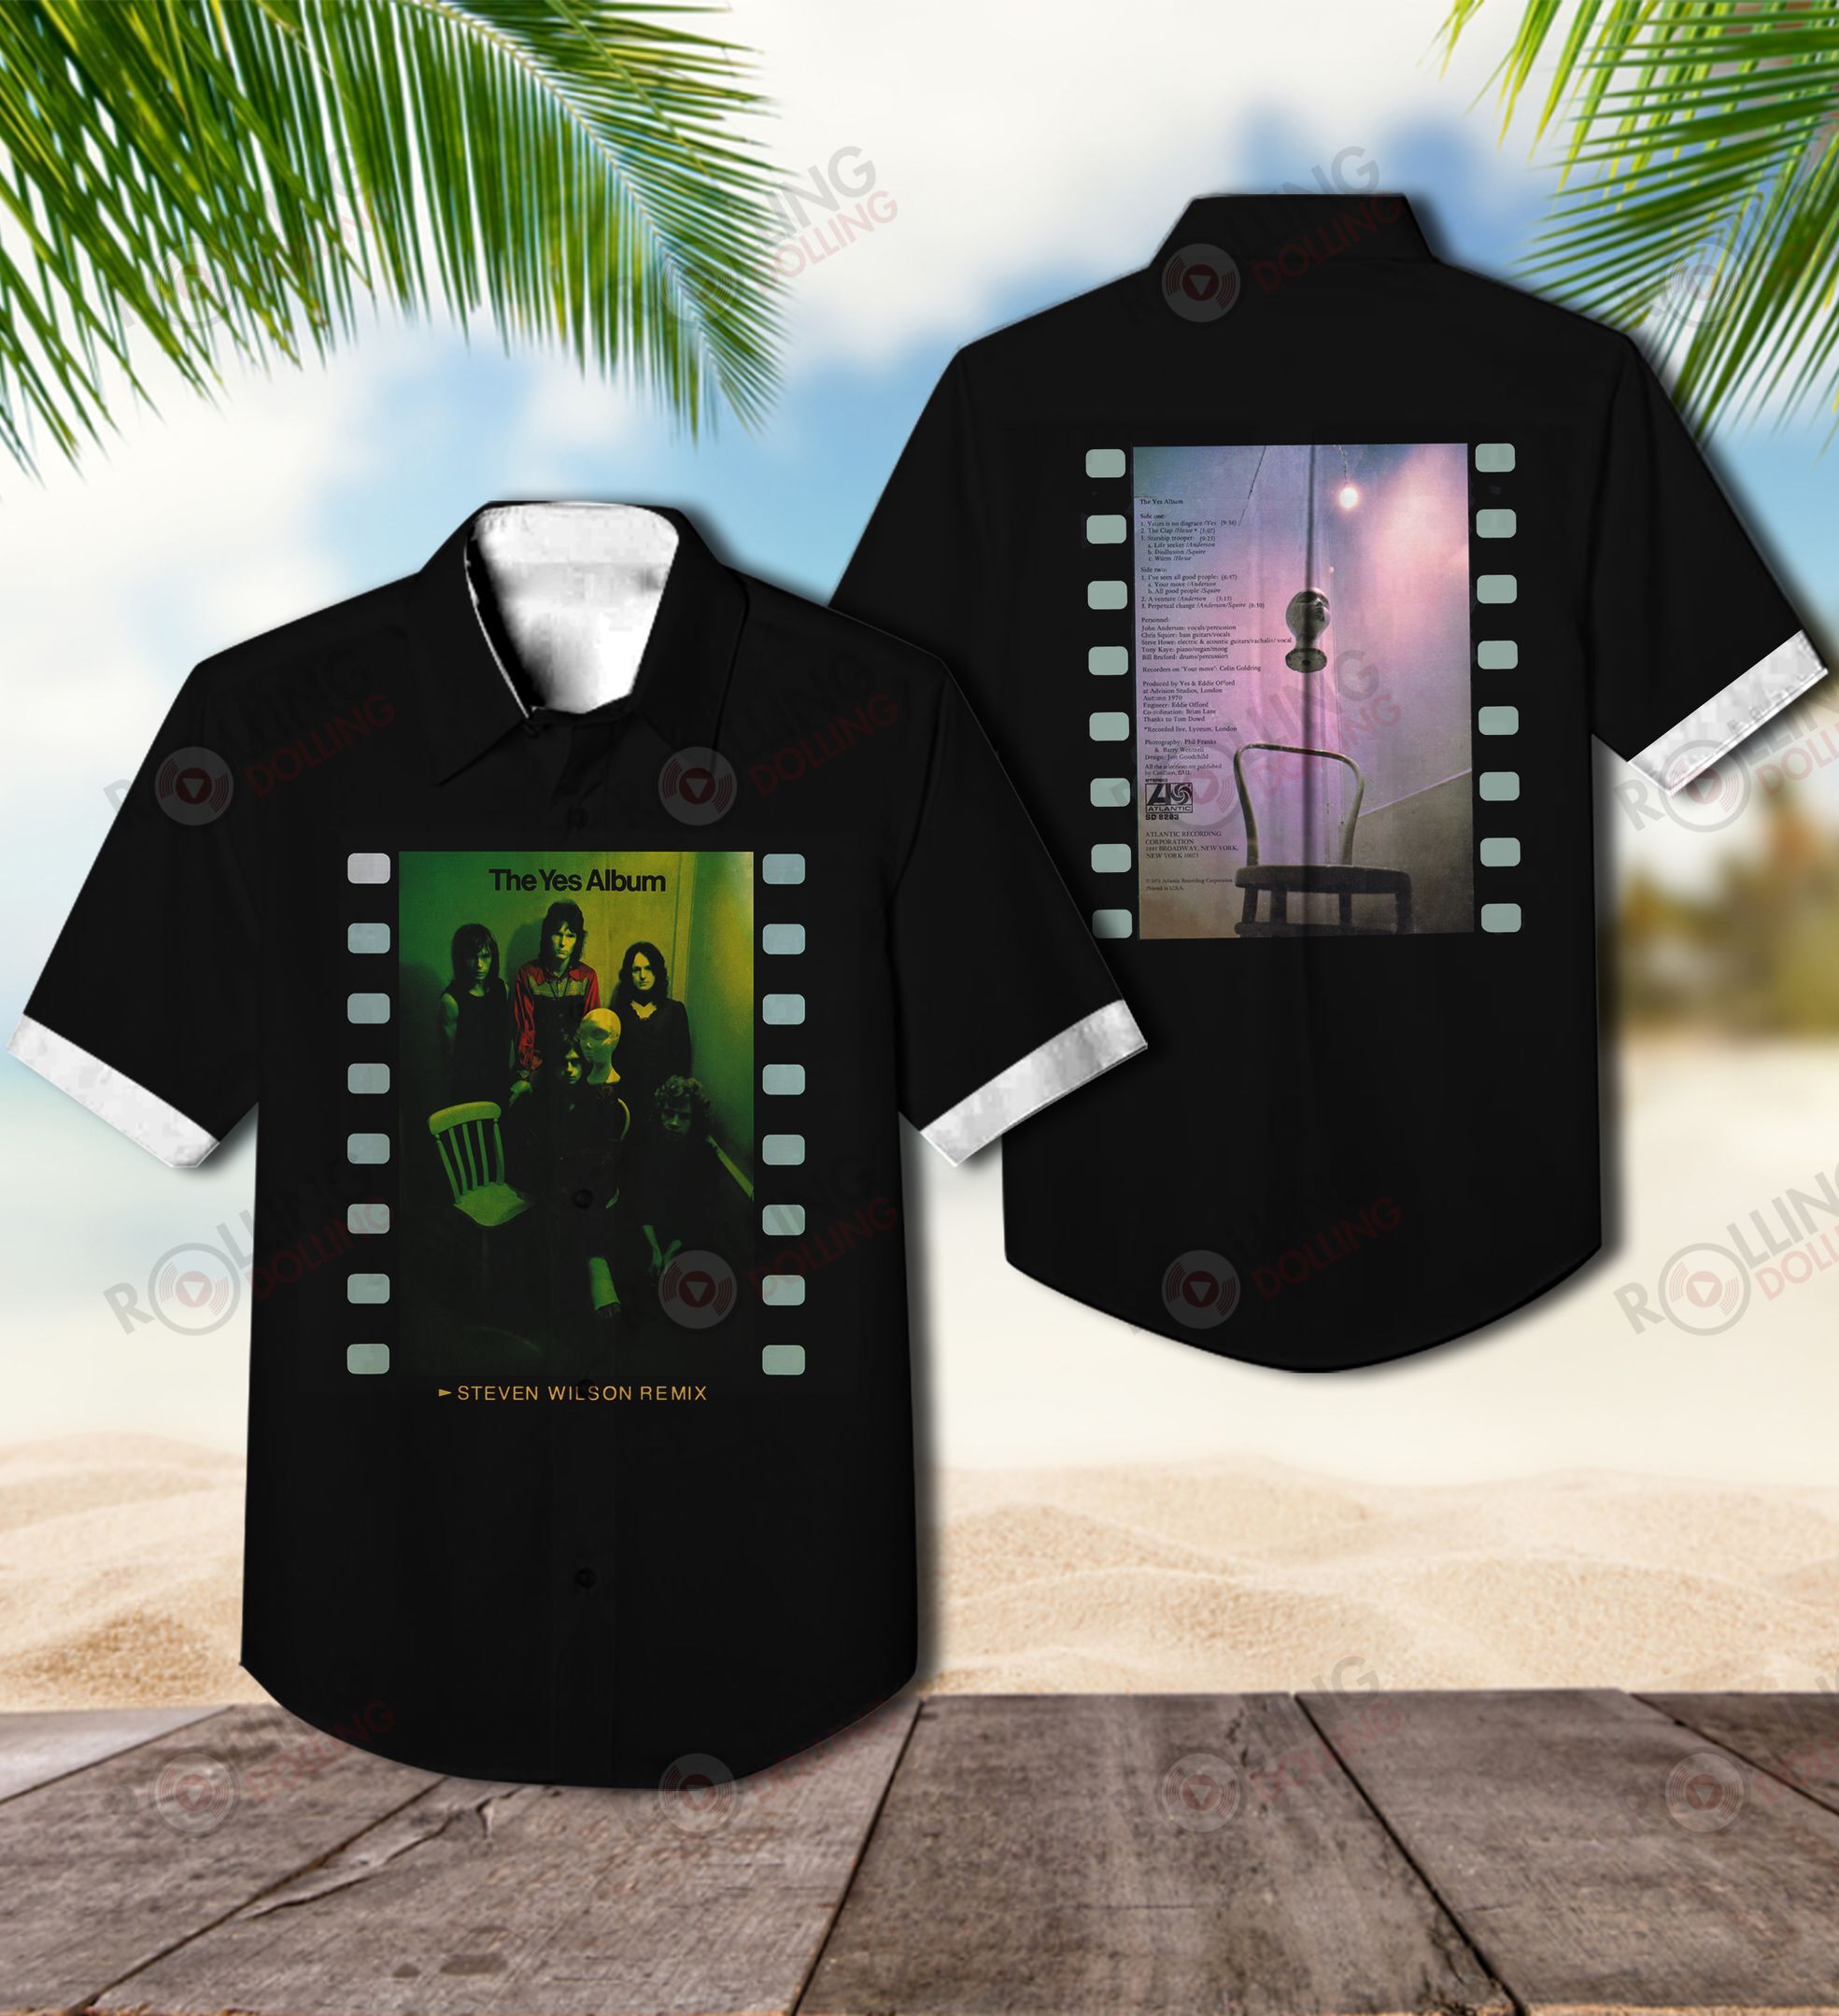 The Hawaiian Shirt is a popular shirt that is worn by Rock band fans 60